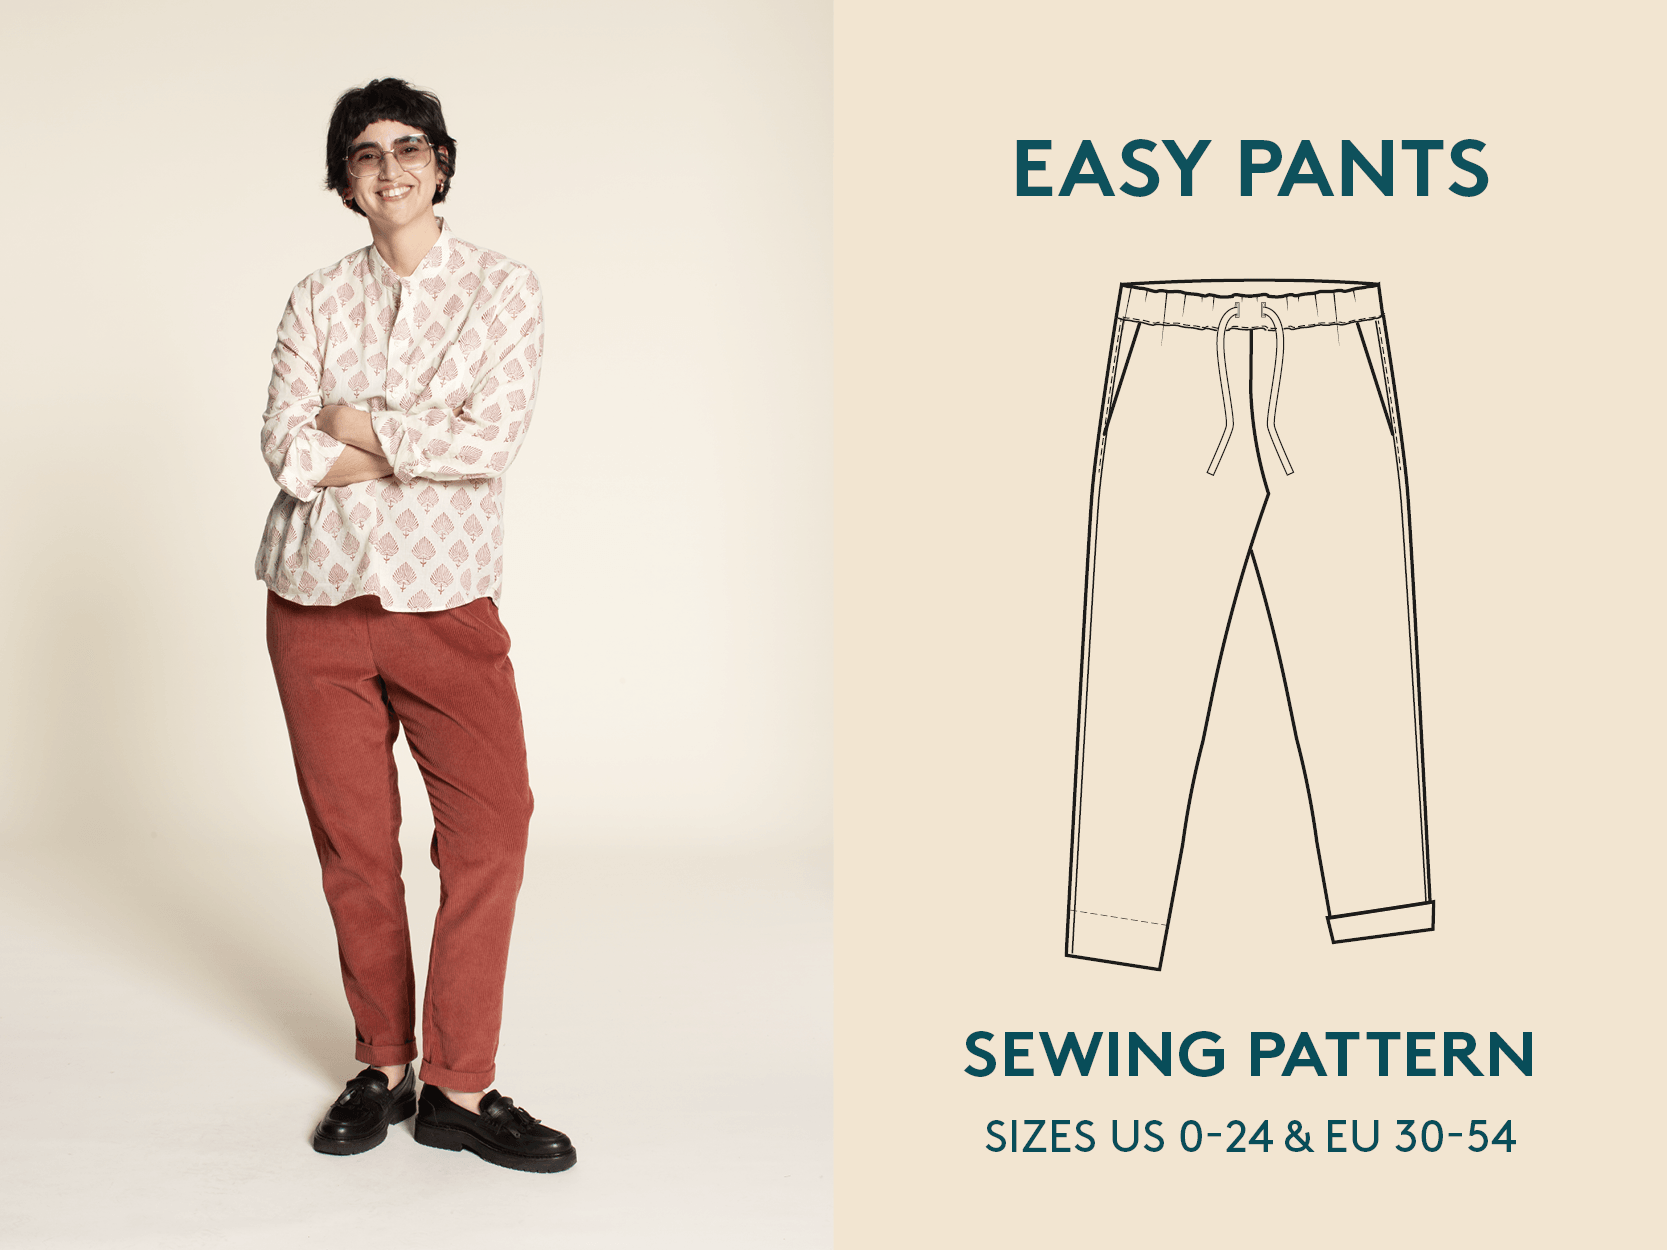 Easy pants sewing pattern